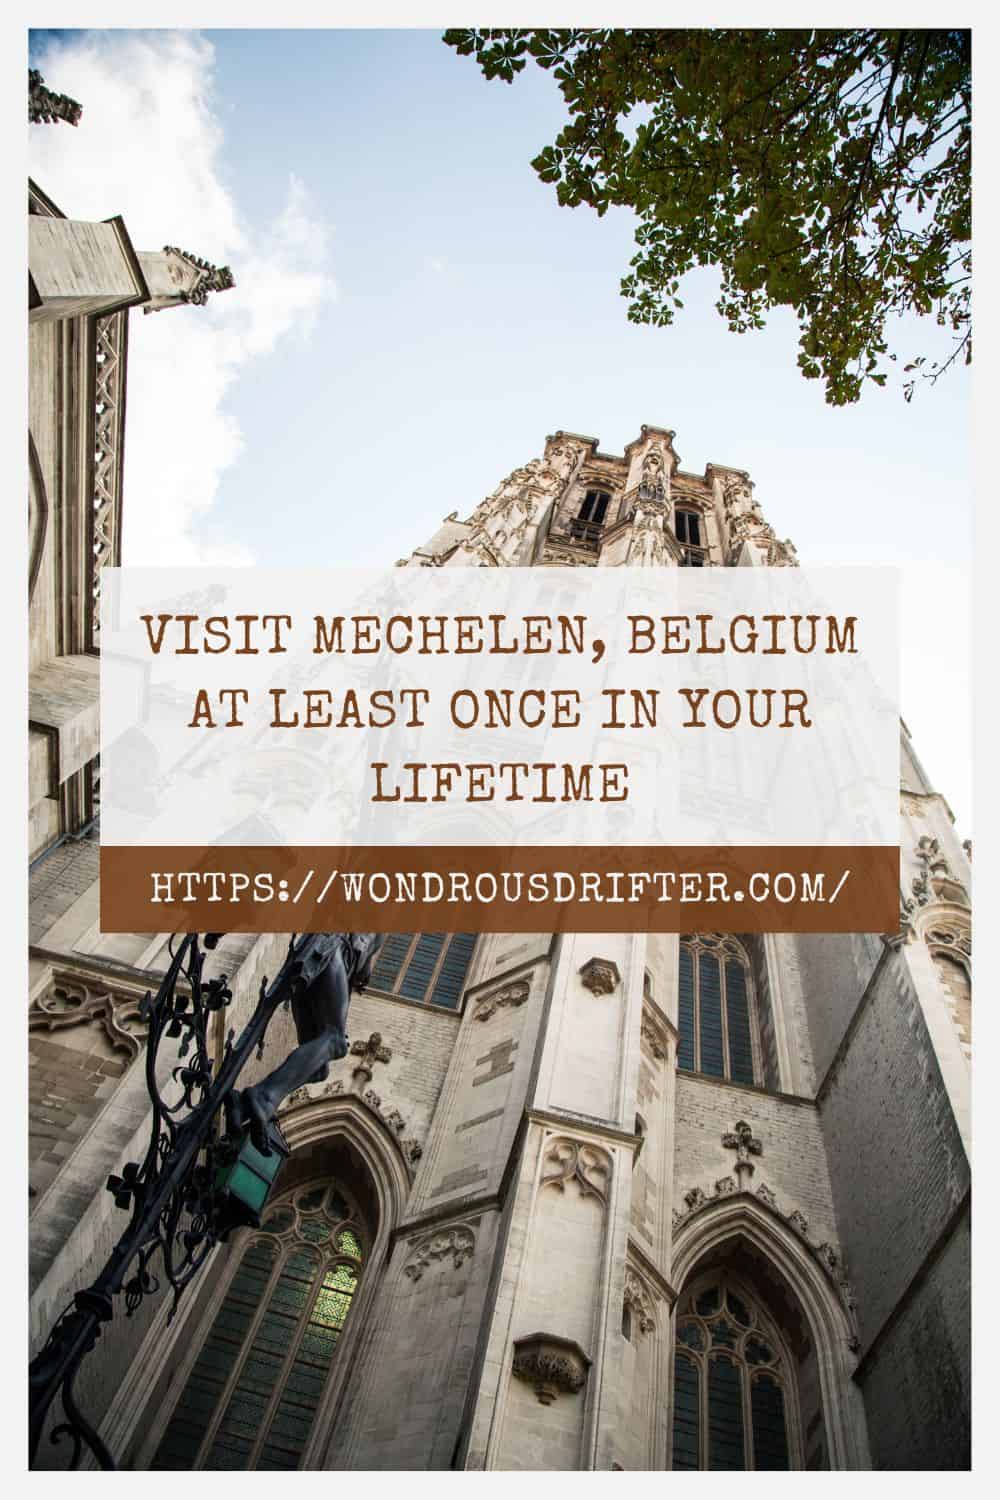 Visit Mechelen Belgium at least once in your lifetime